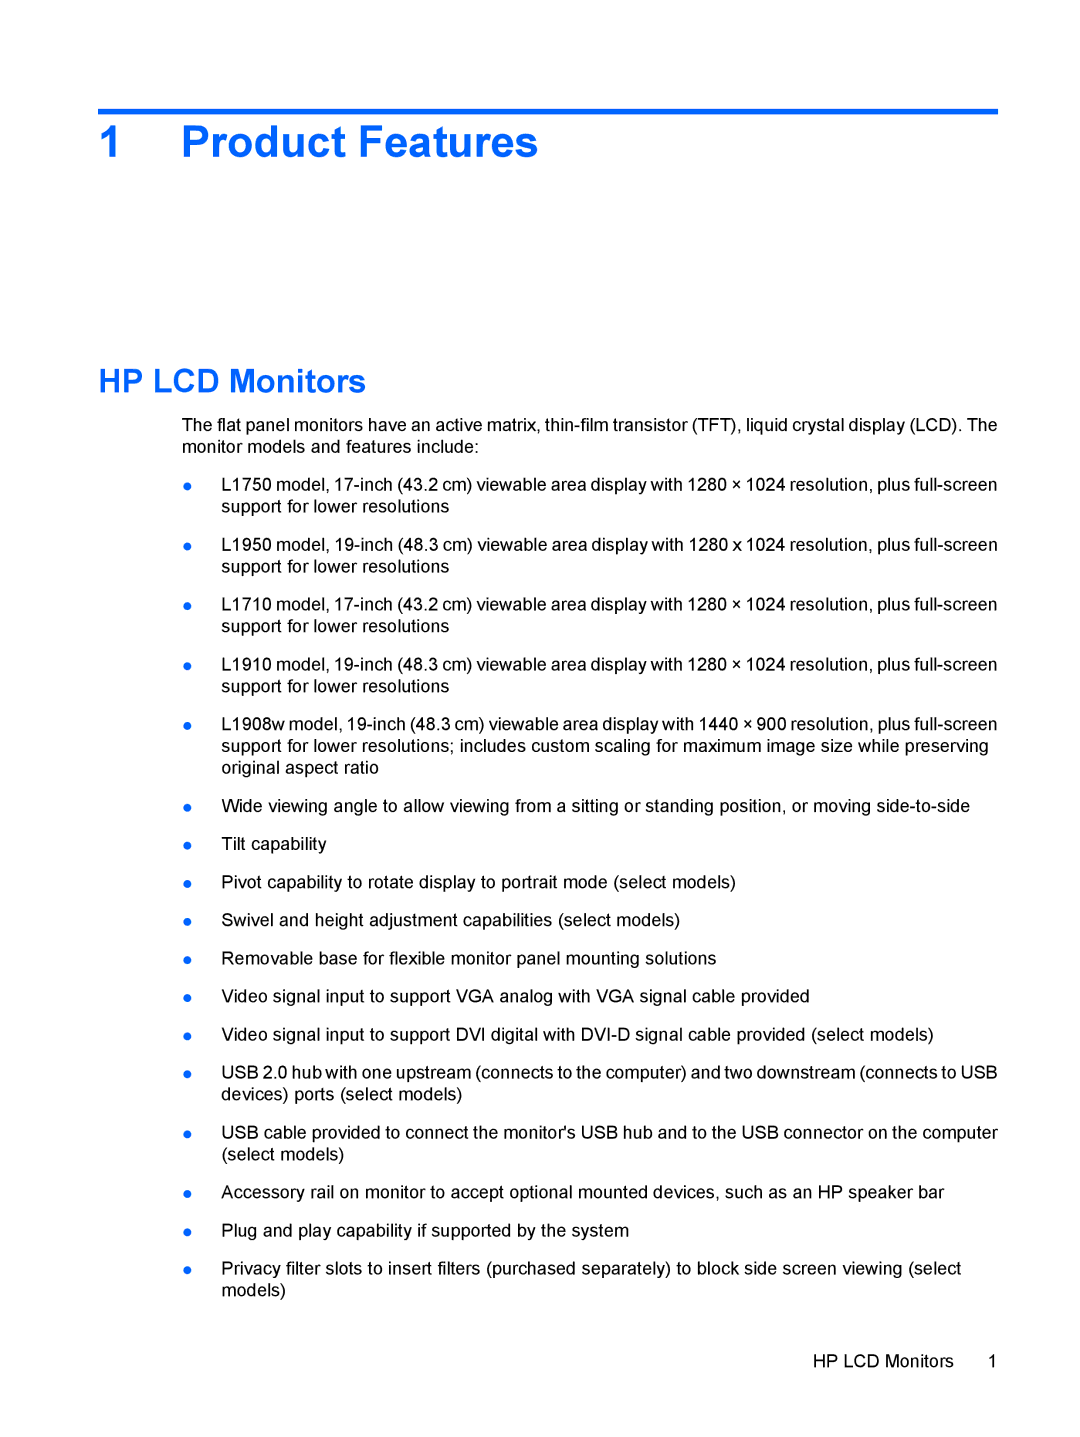 HP L1908w 19-inch manual Product Features, HP LCD Monitors 